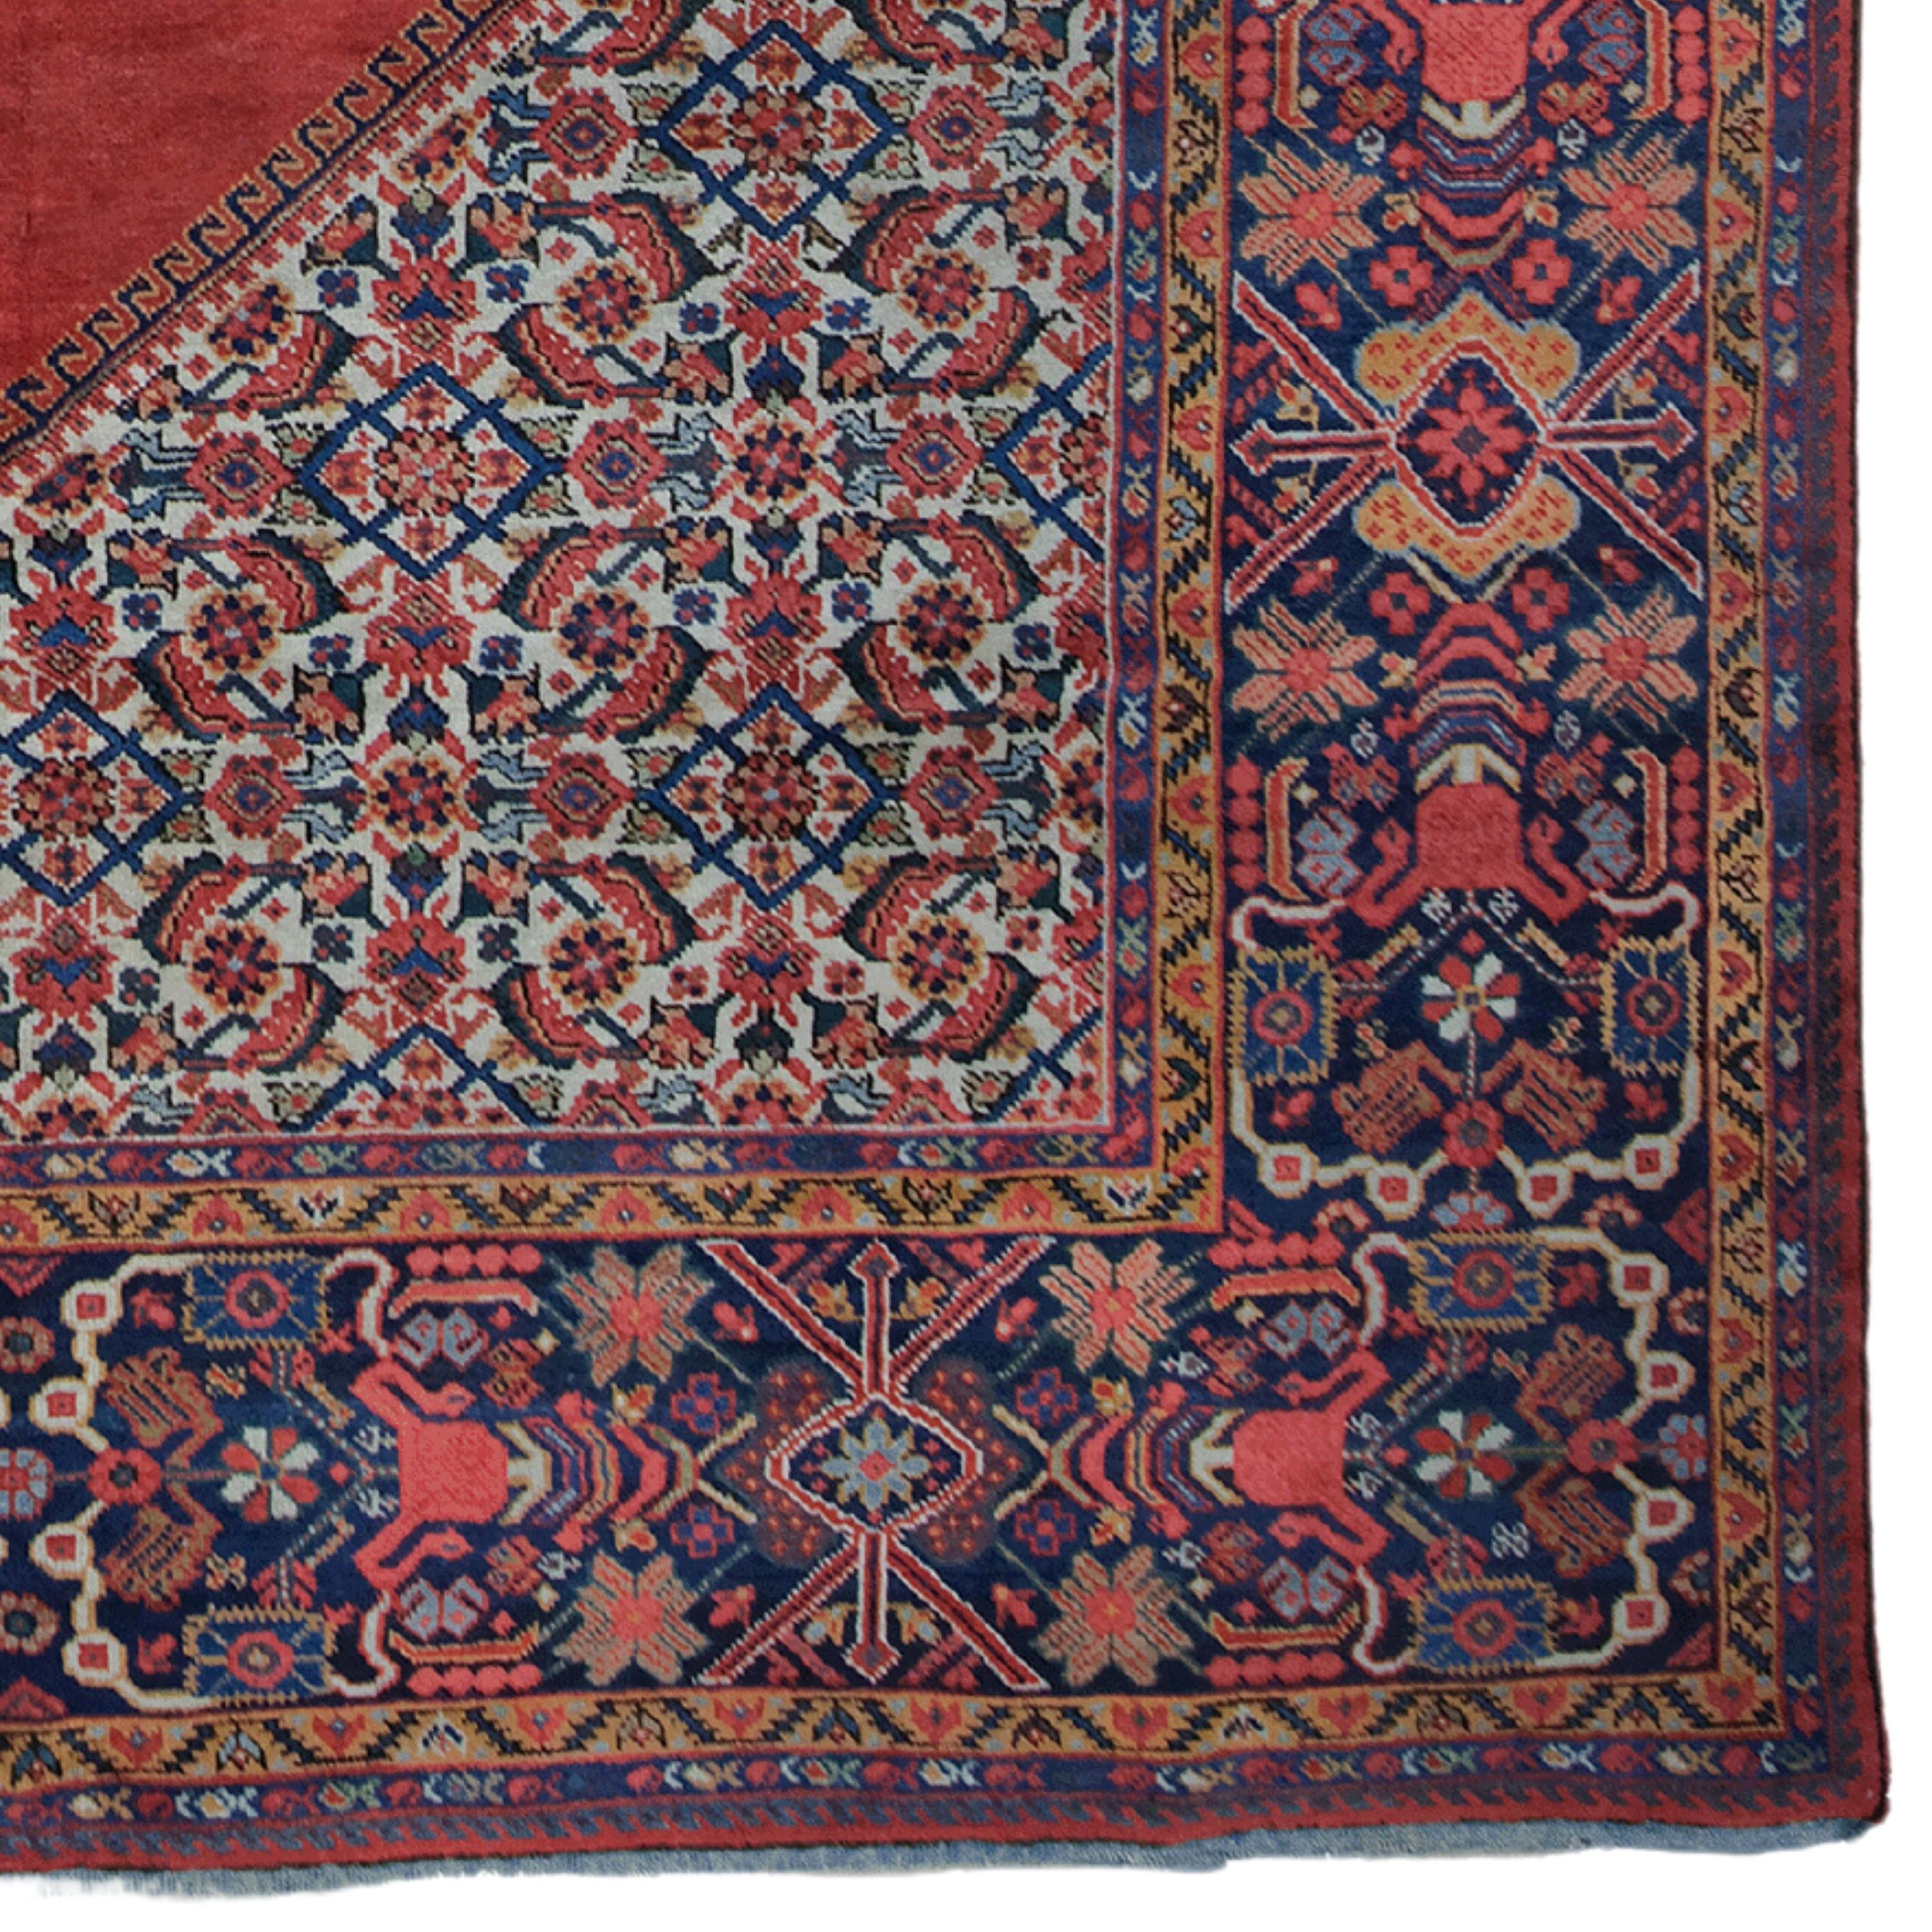 Wool Antique Mahal Rug - Late of 19th Century Mahal Rug, Antique Rug, Handmade Rug For Sale